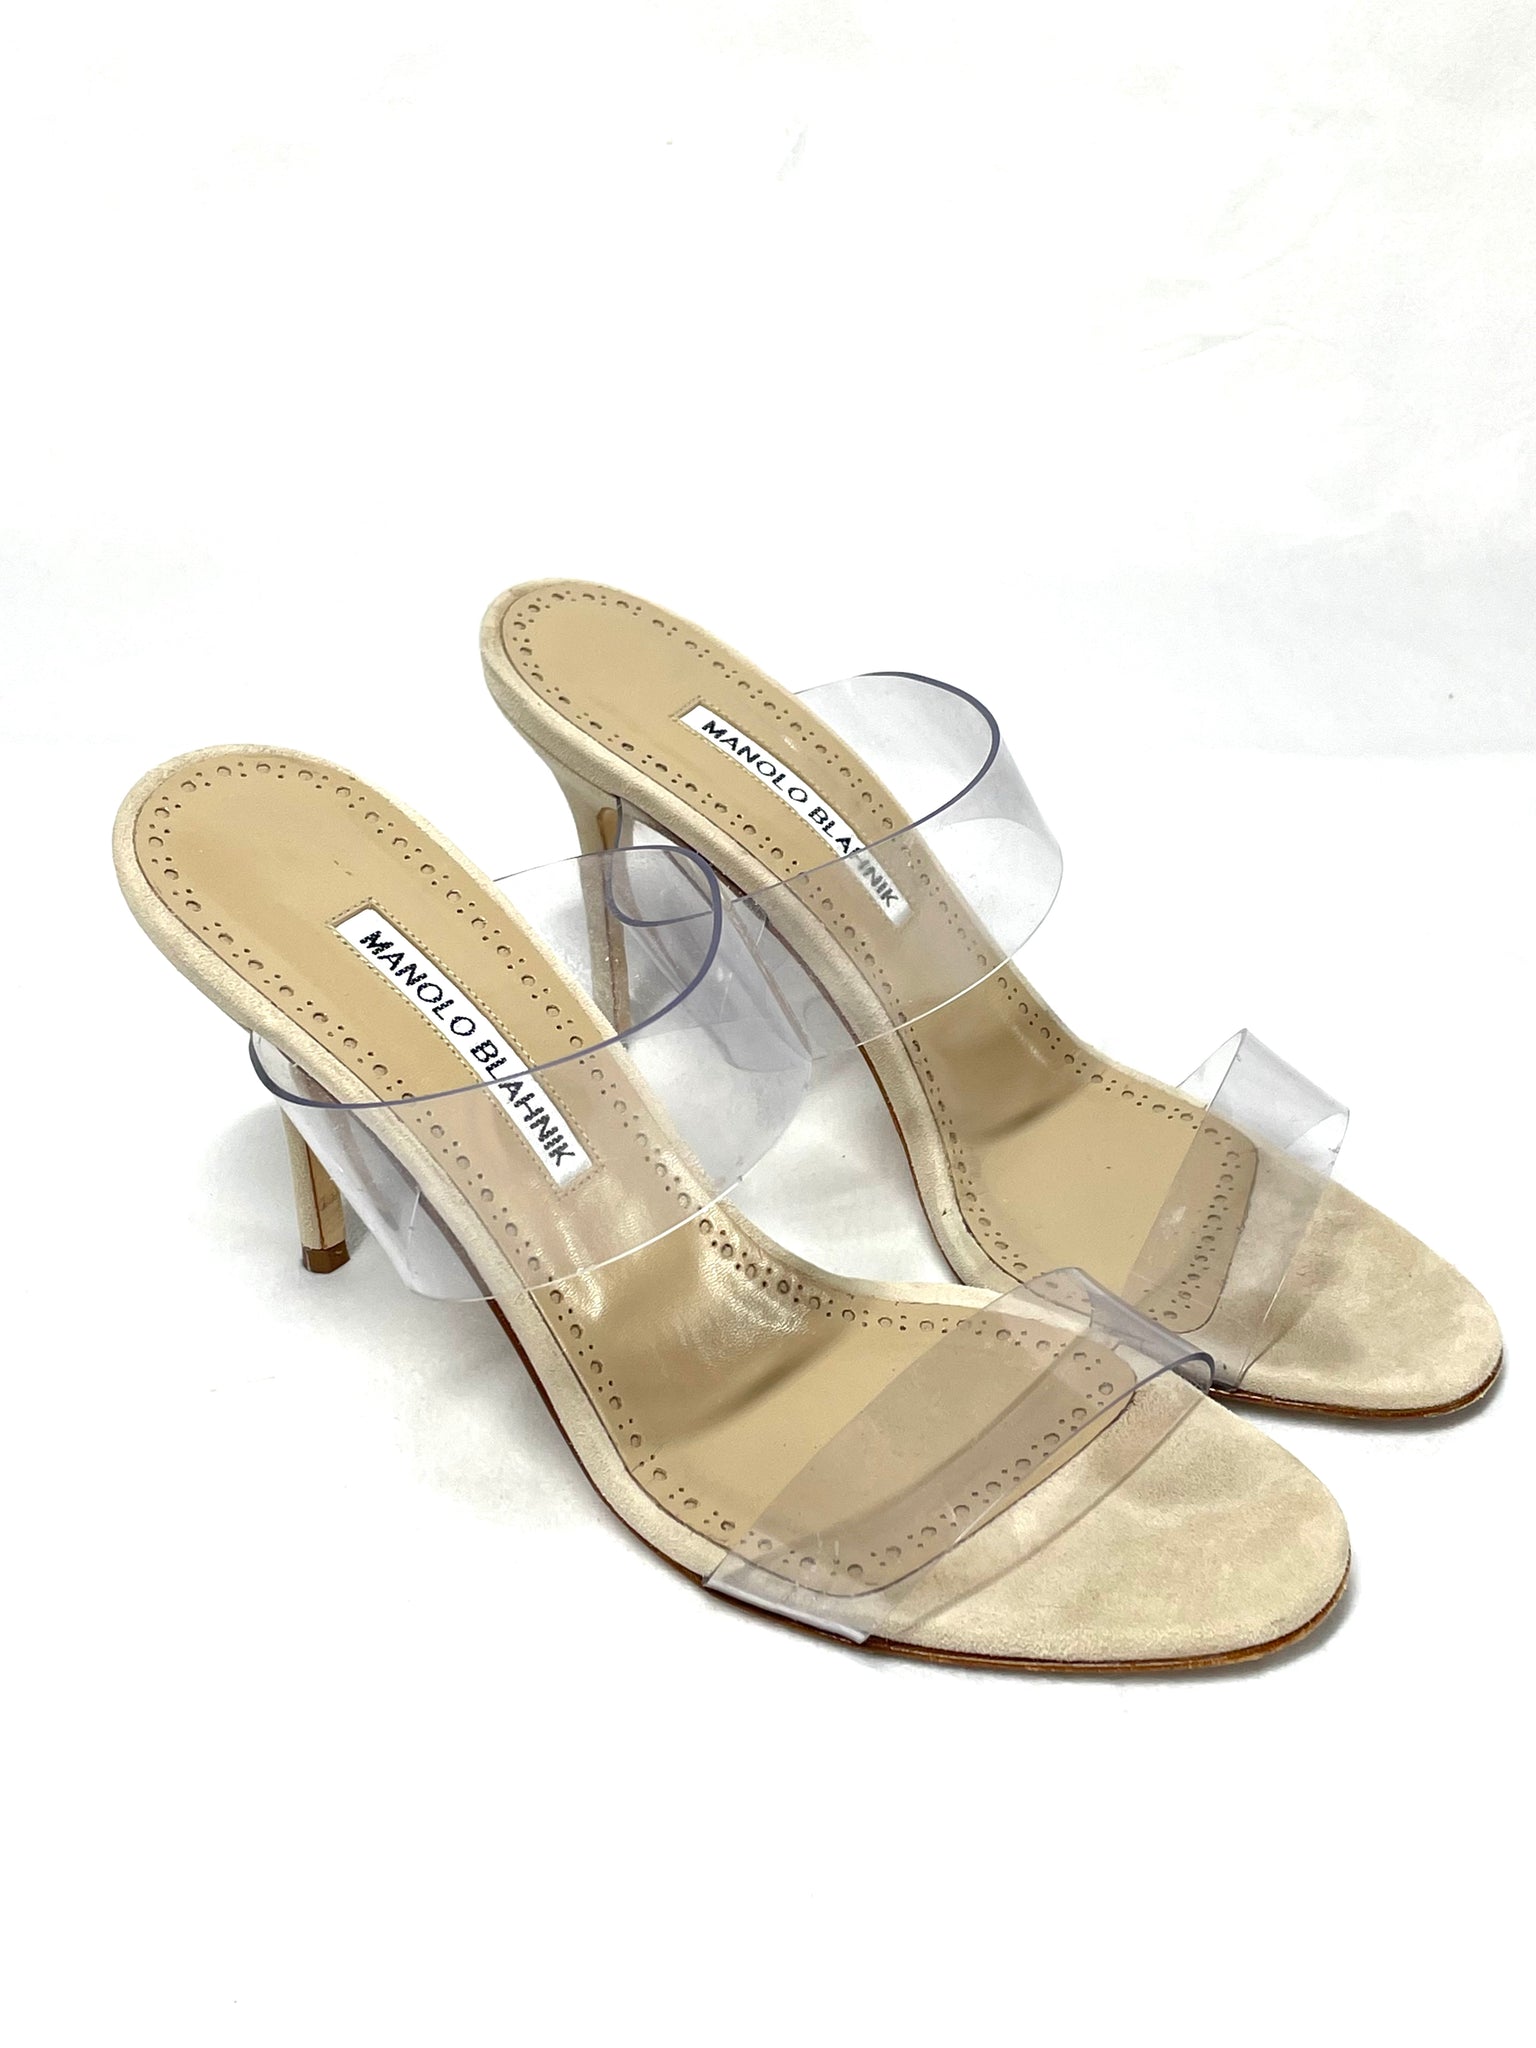 Pre Loved Manolo Blahnik PVC Heels 38 with Beige Suede Heels and two PVS Straps available at UniKoncept in Waterloo